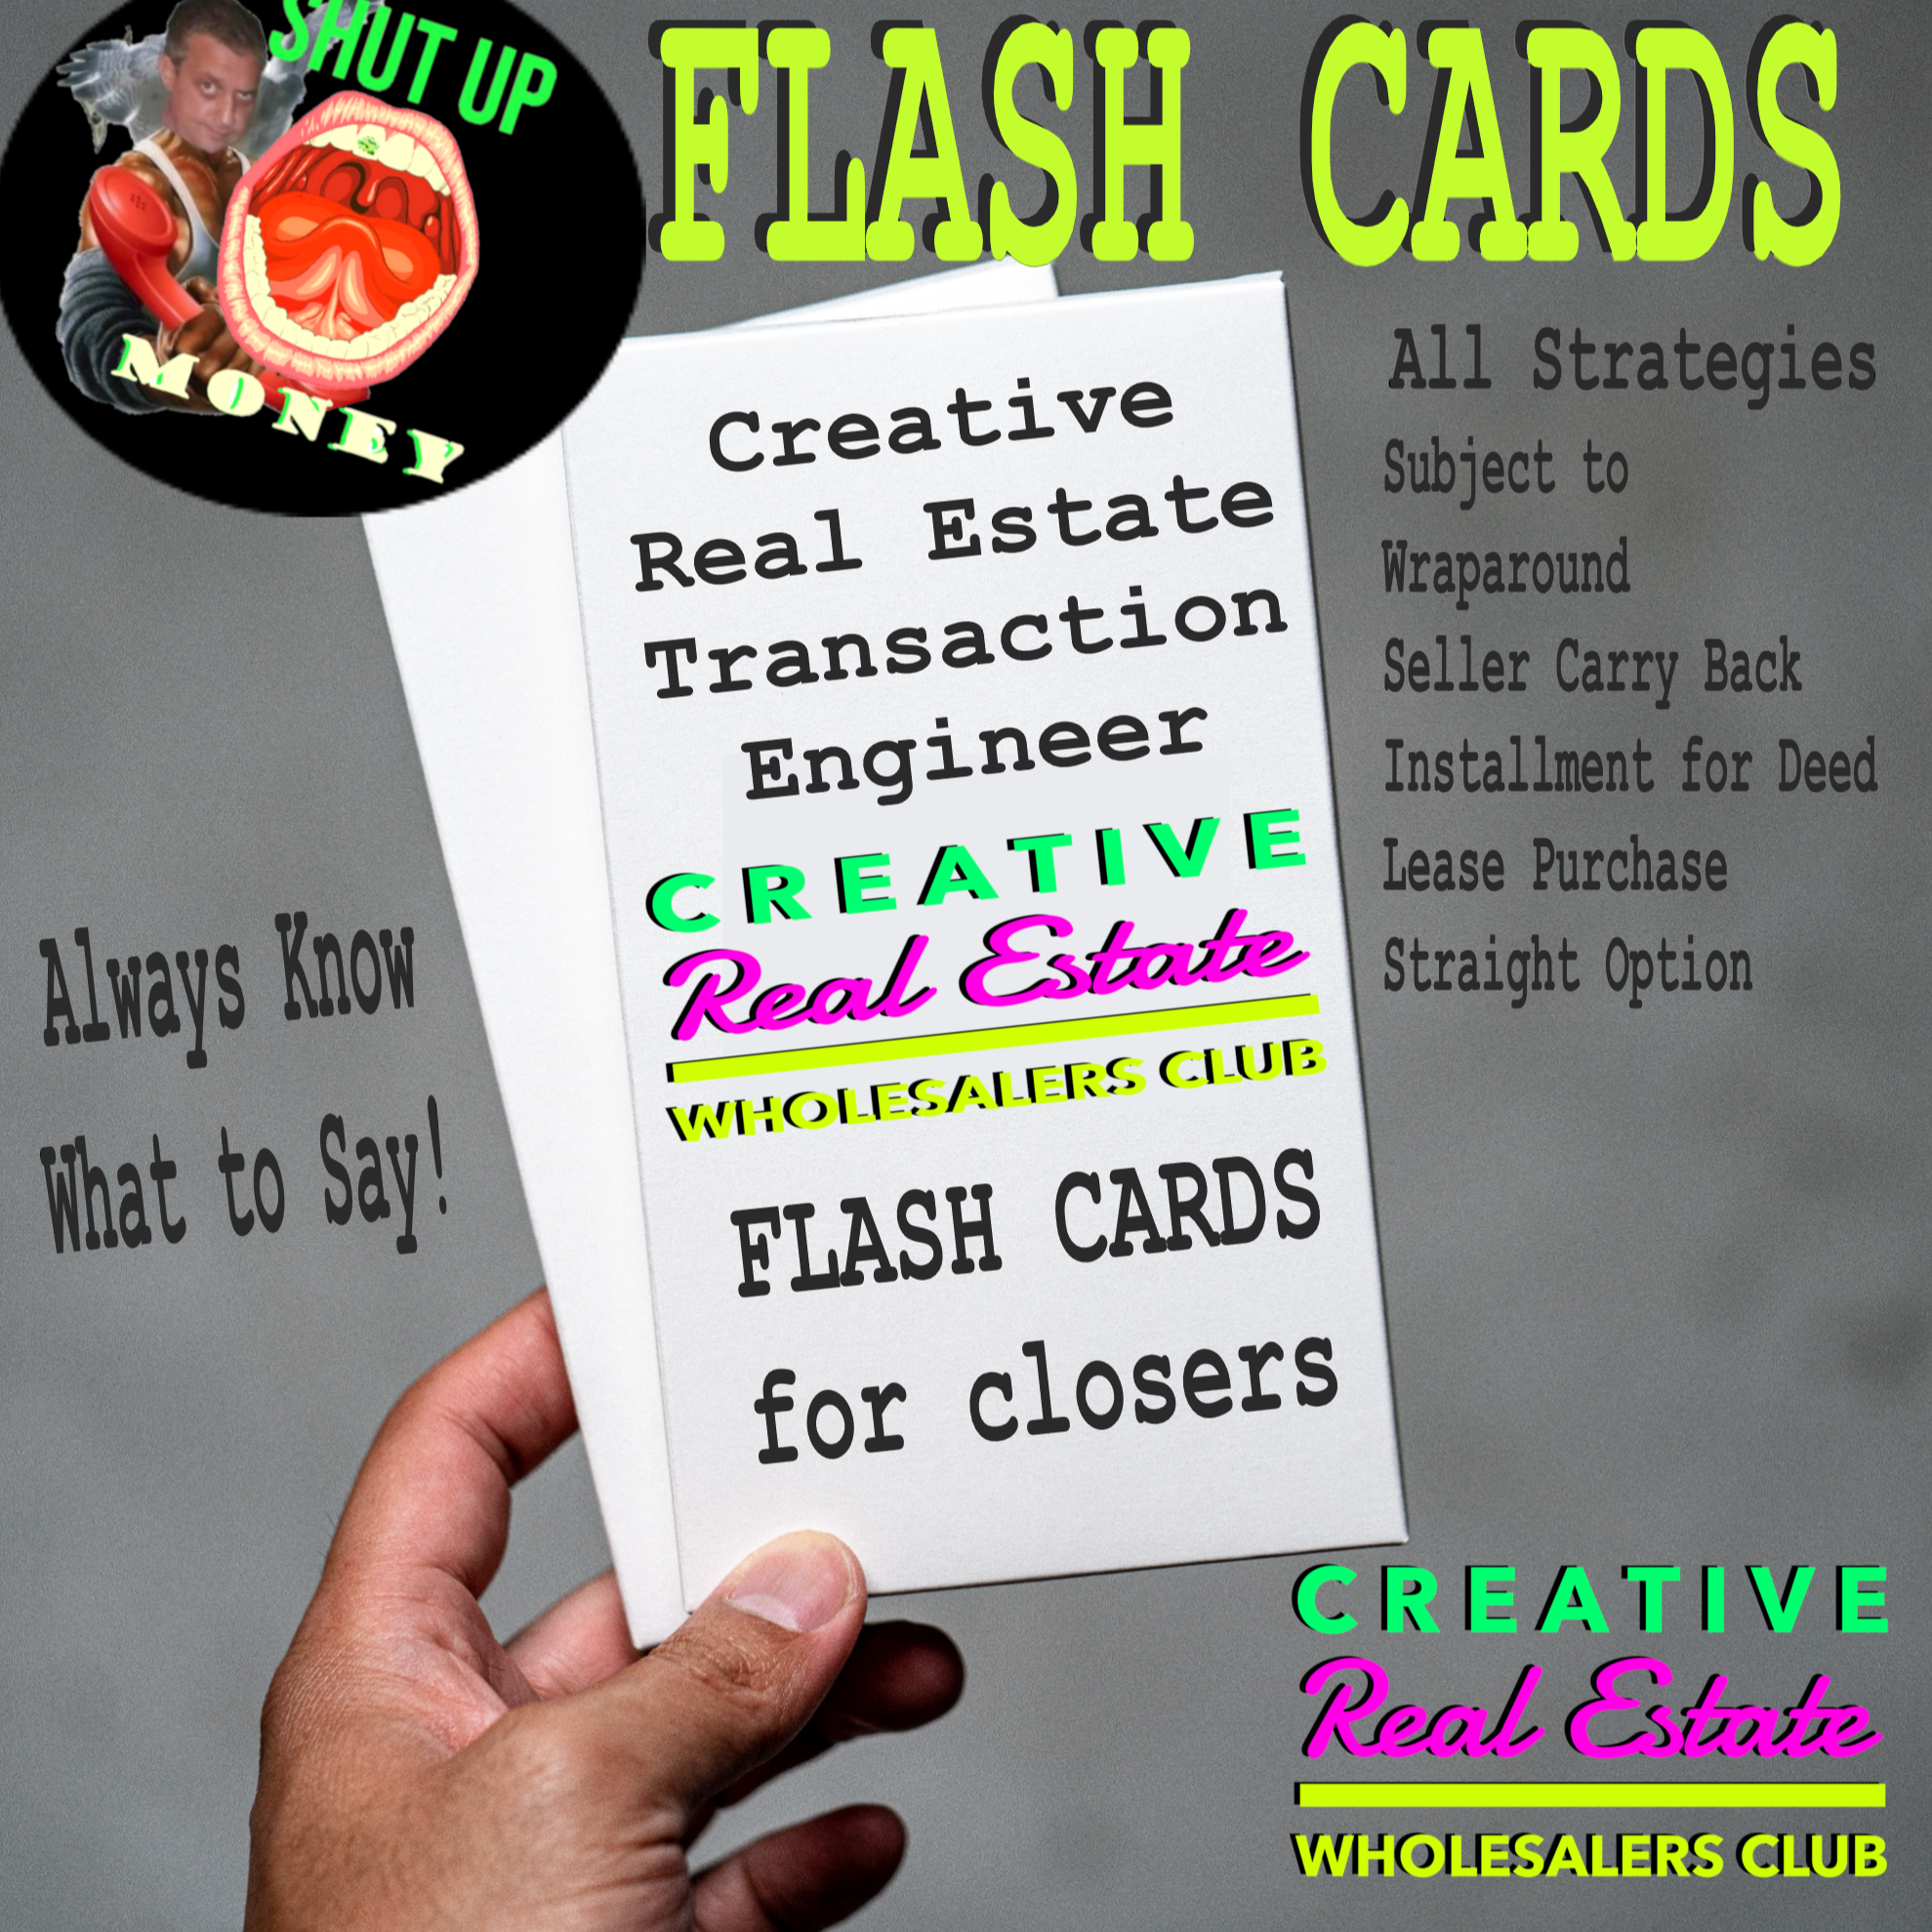 Normally $97, Now Only $65: Creative Real Estate Transaction Engineer Flash Cards for Closers (70 Cards Total)